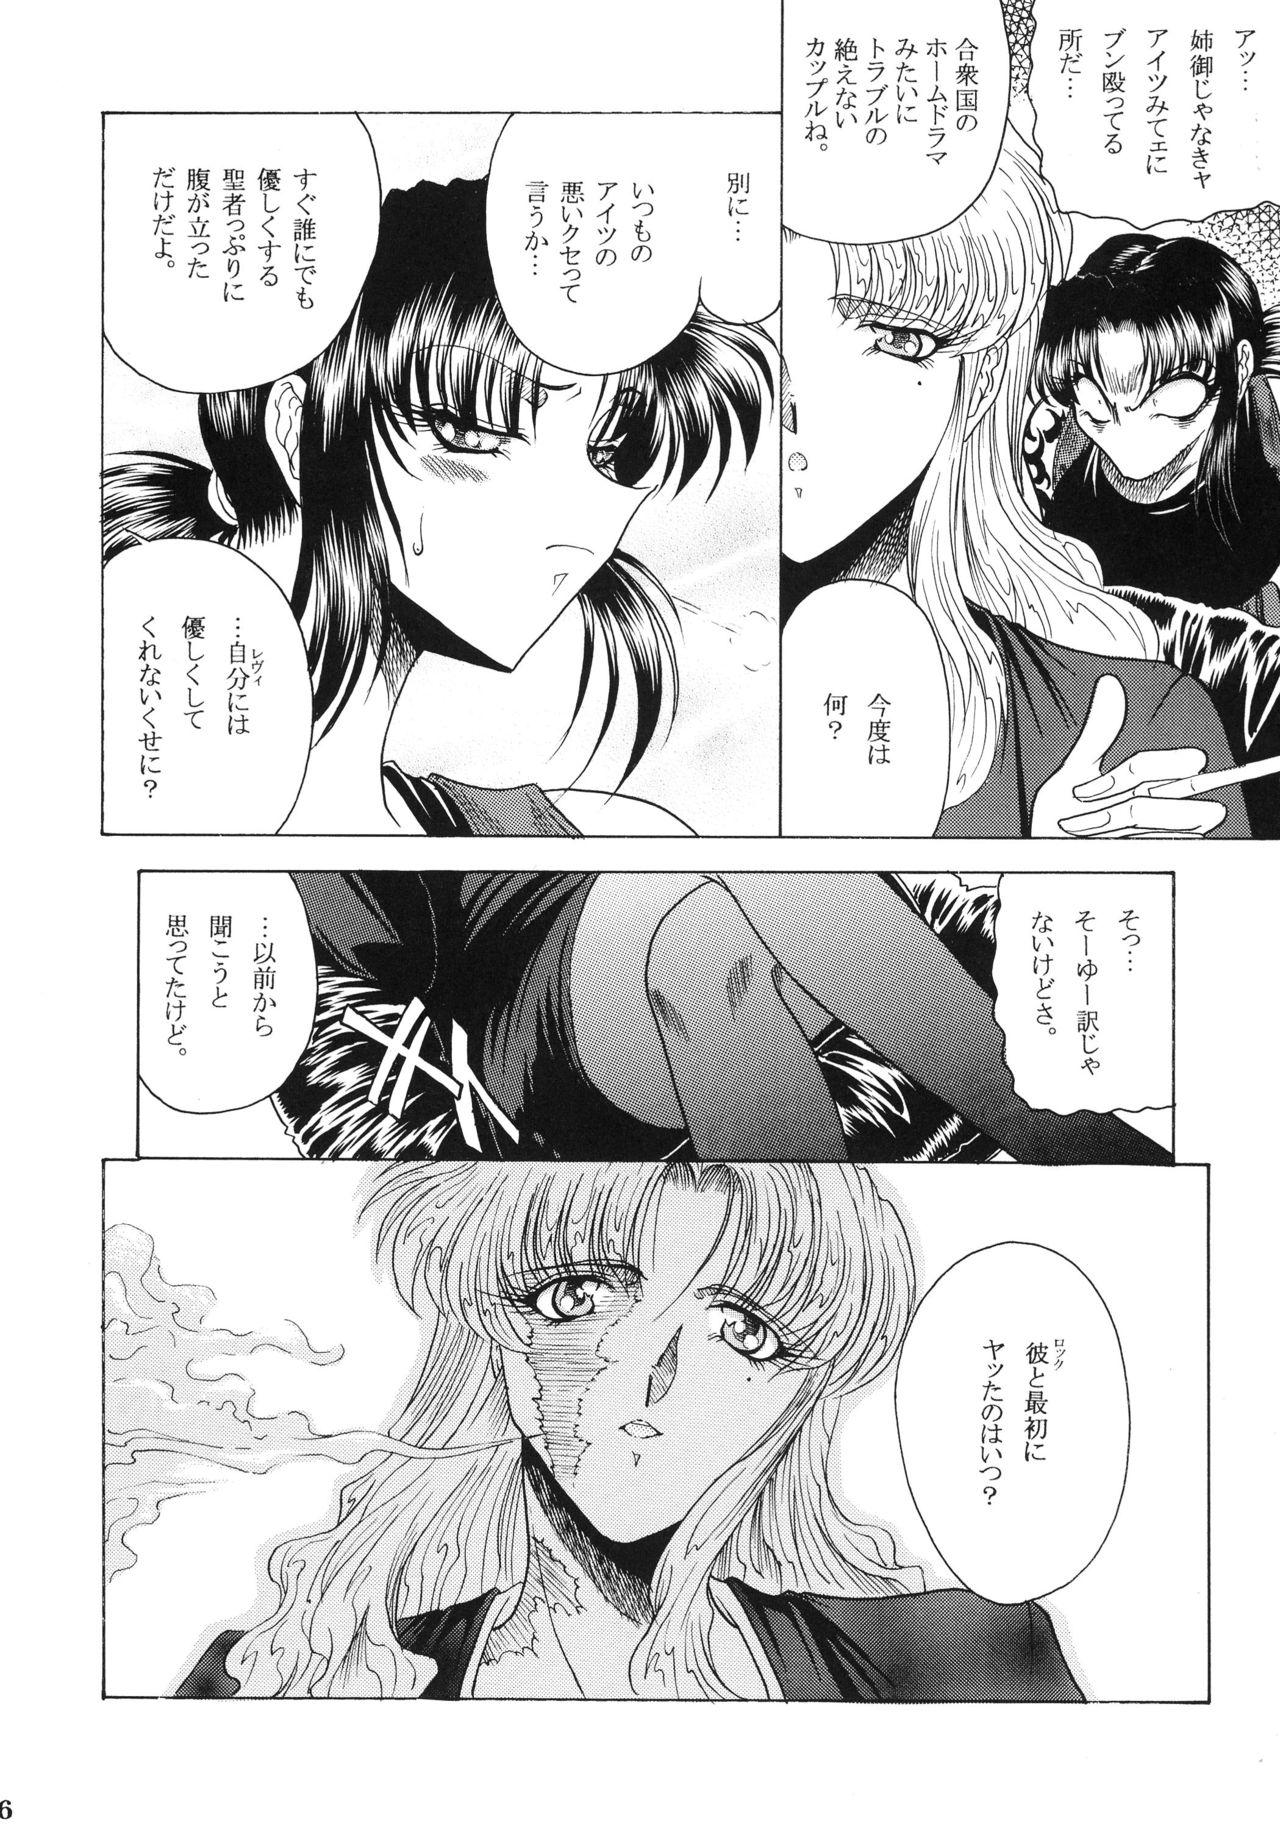 Blowjob ZONE 38 China Syndrome - Black lagoon Speculum - Page 5